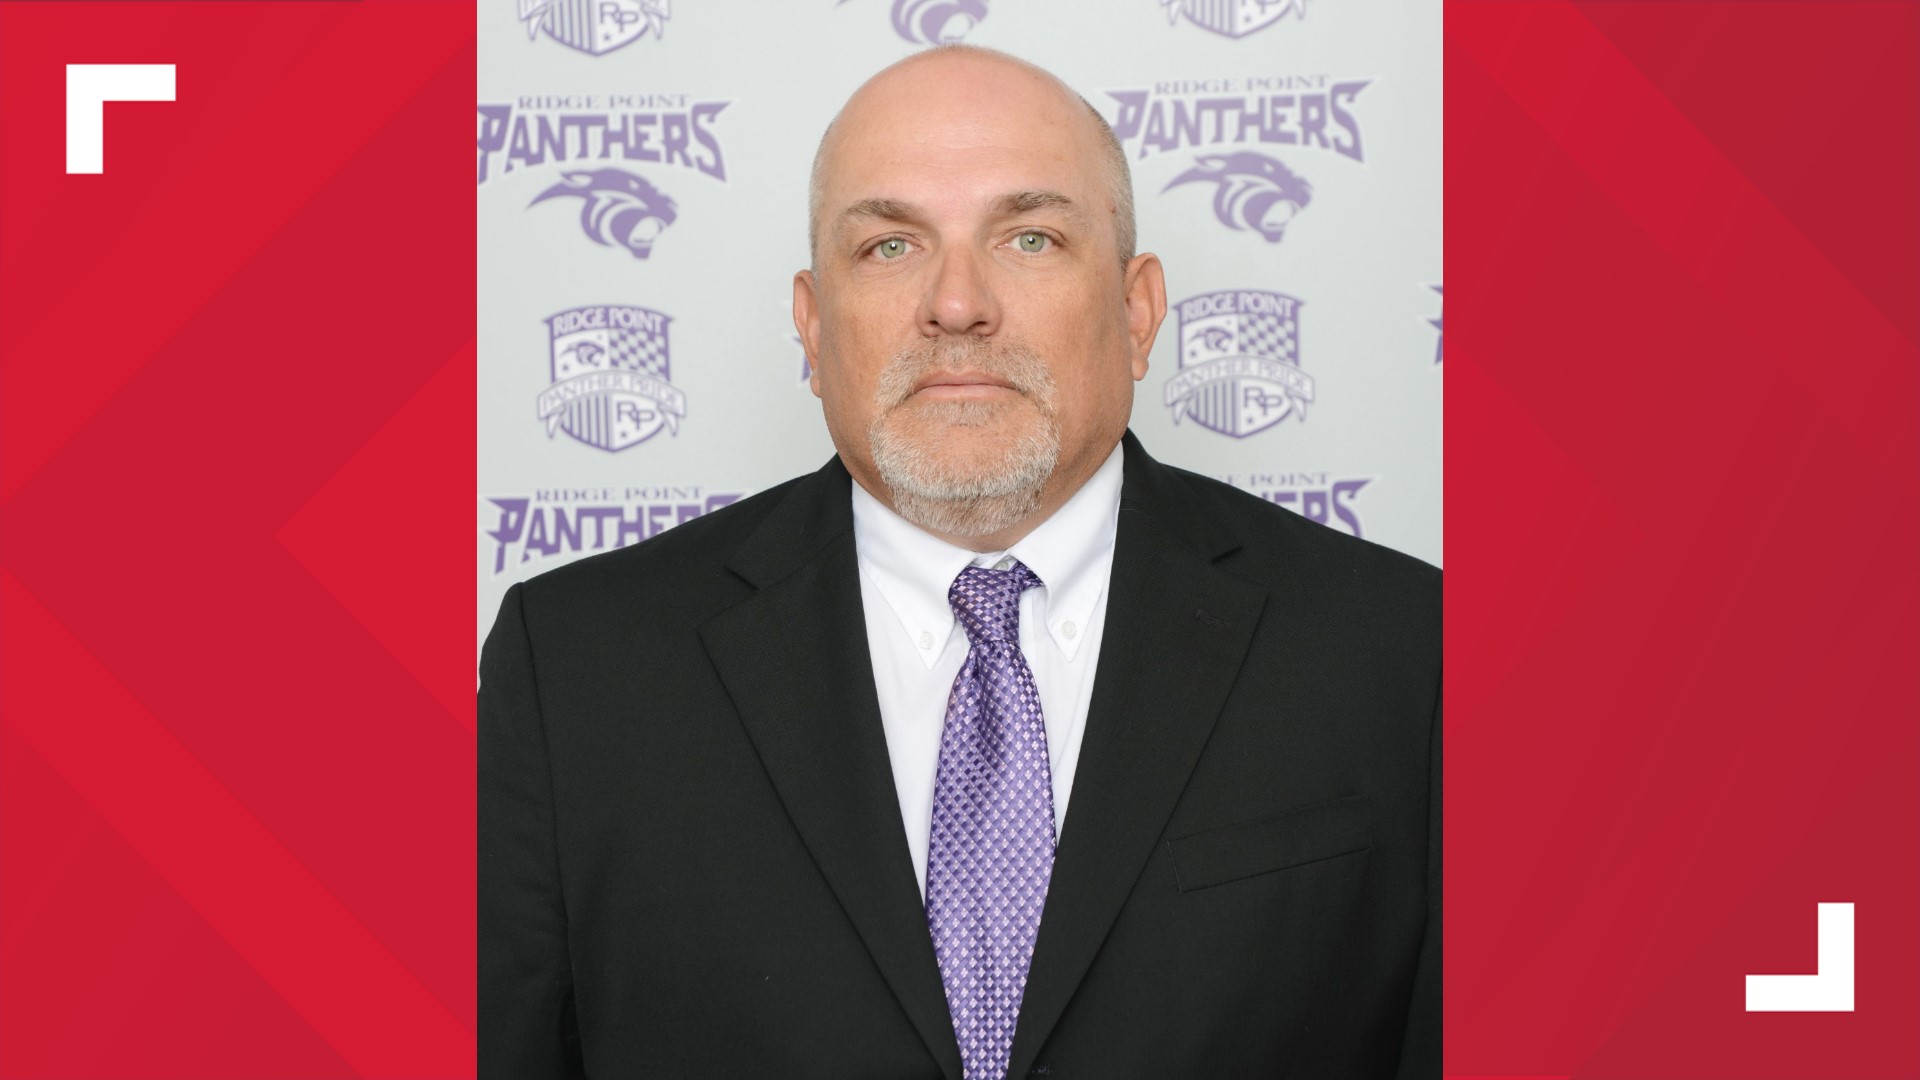 Pending board approval, the district will name Brett Sniffin as the head football coach at Belton High School.